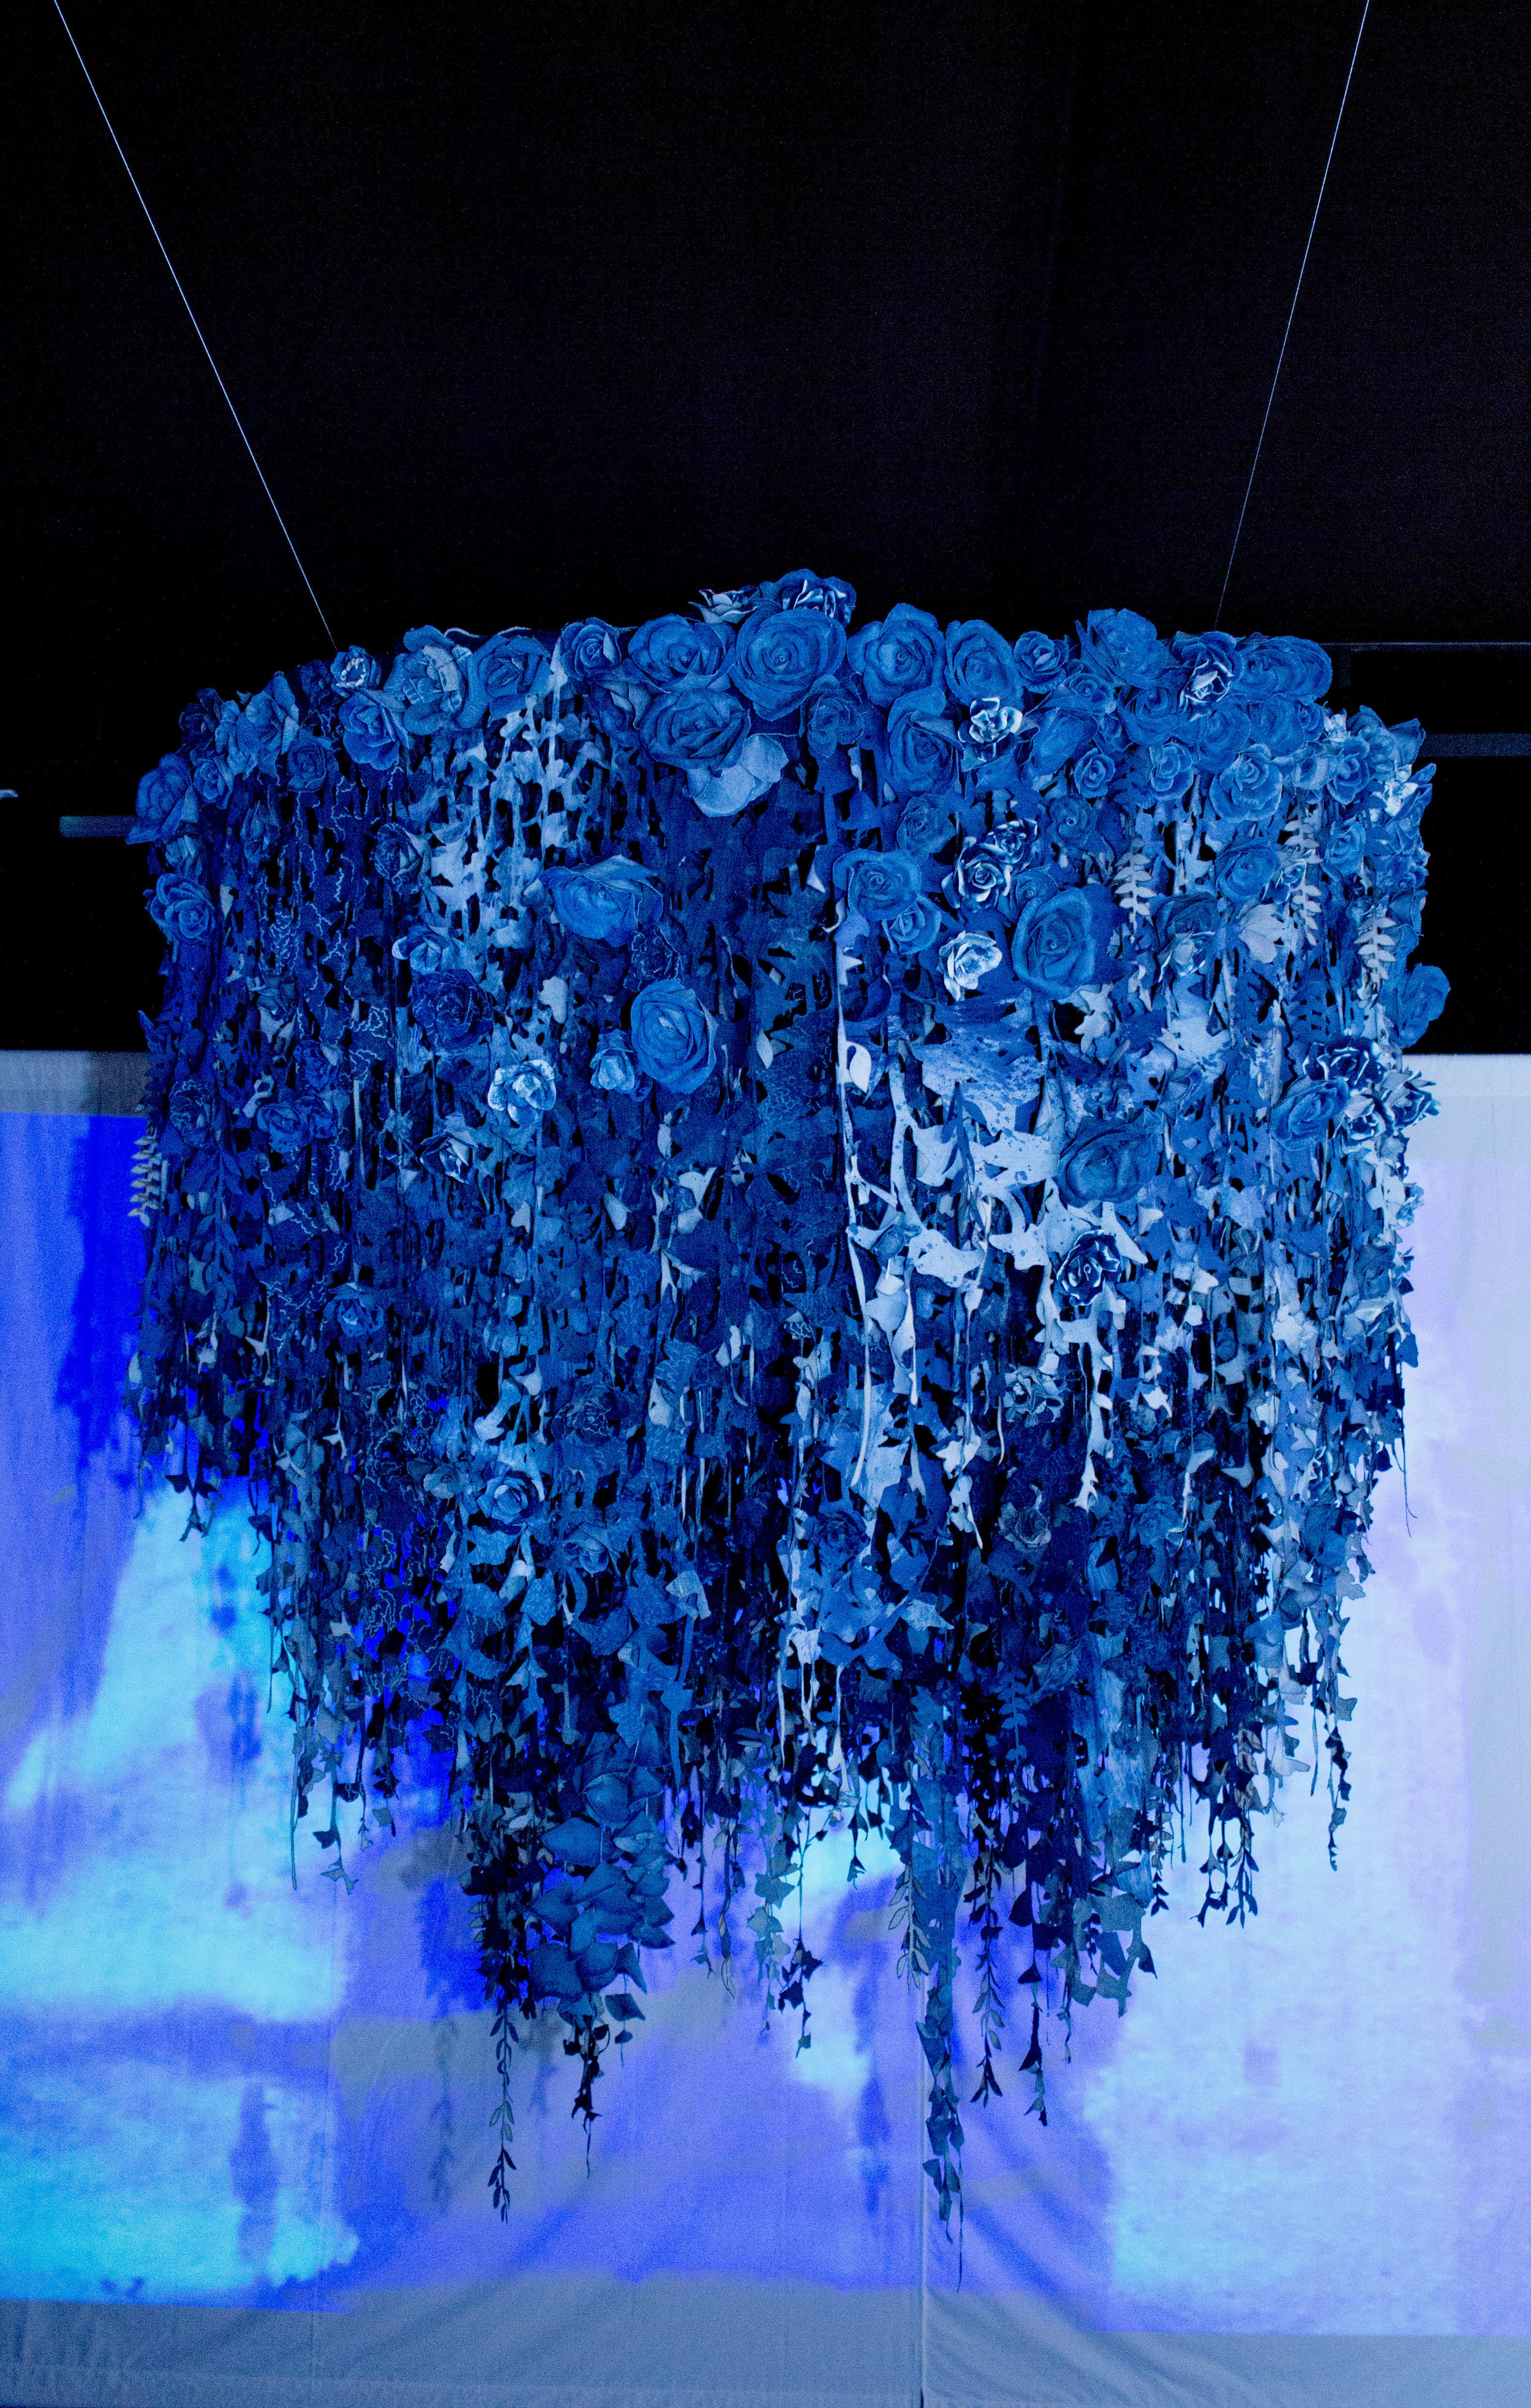  Recycled denim hanging garden trellis installation by Ian Berry with Tonello and Juan Manuel Gomez in Barcelona 2019.  